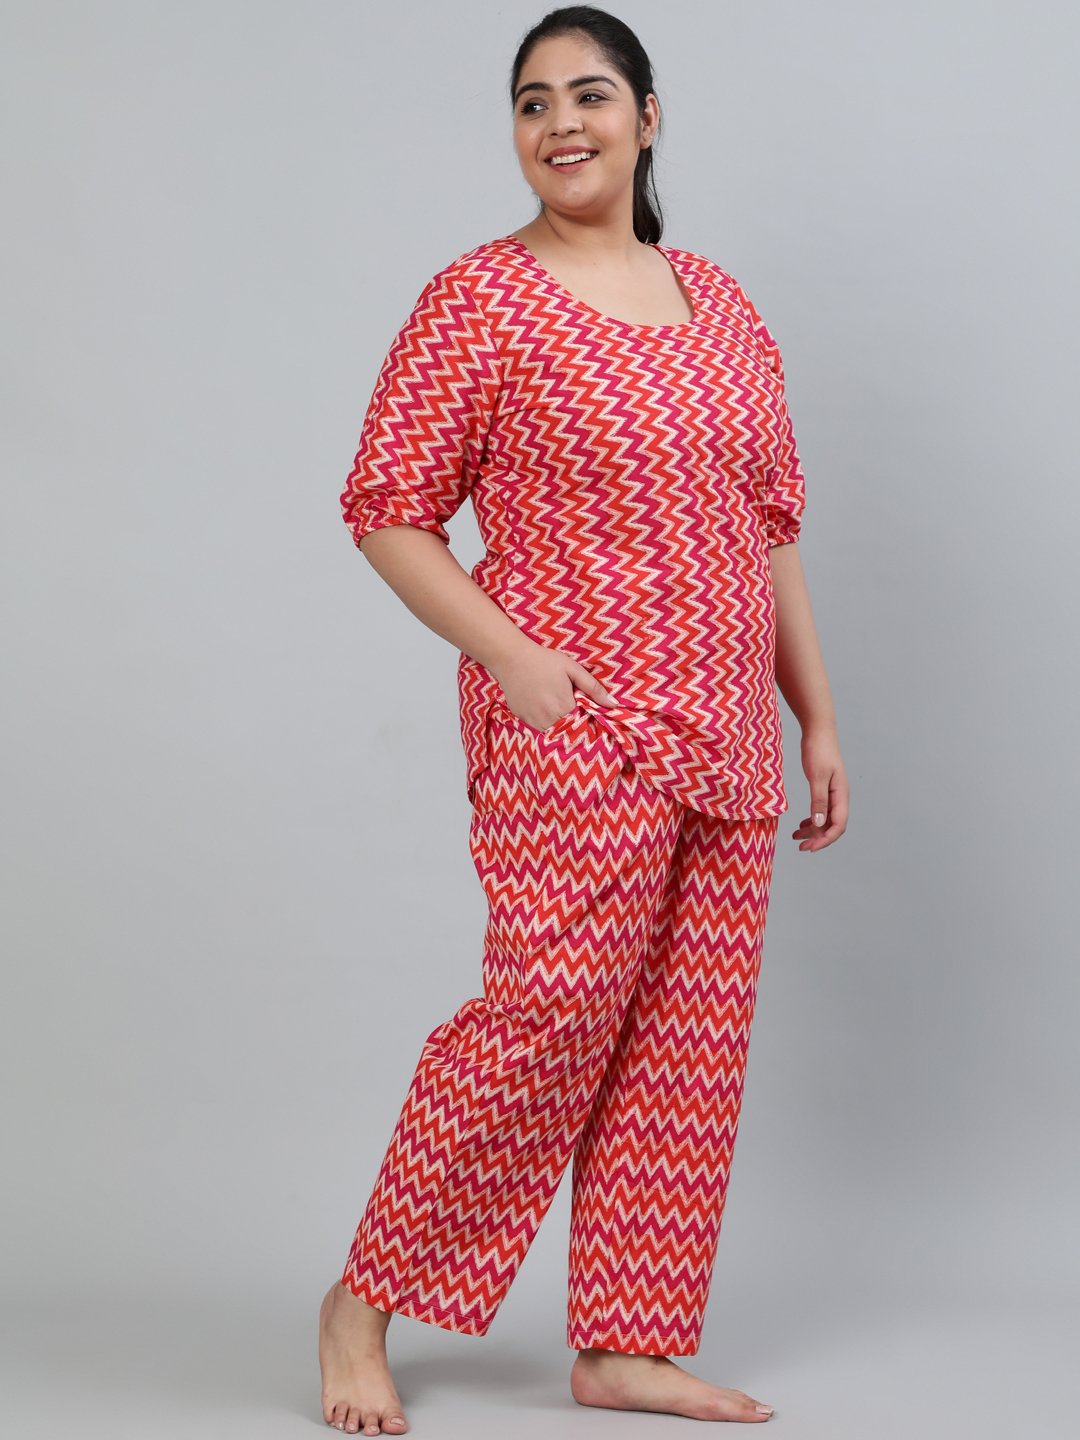 Women's Plus Size Pink Printed Night Suit With Half Sleeves - Nayo Clothing